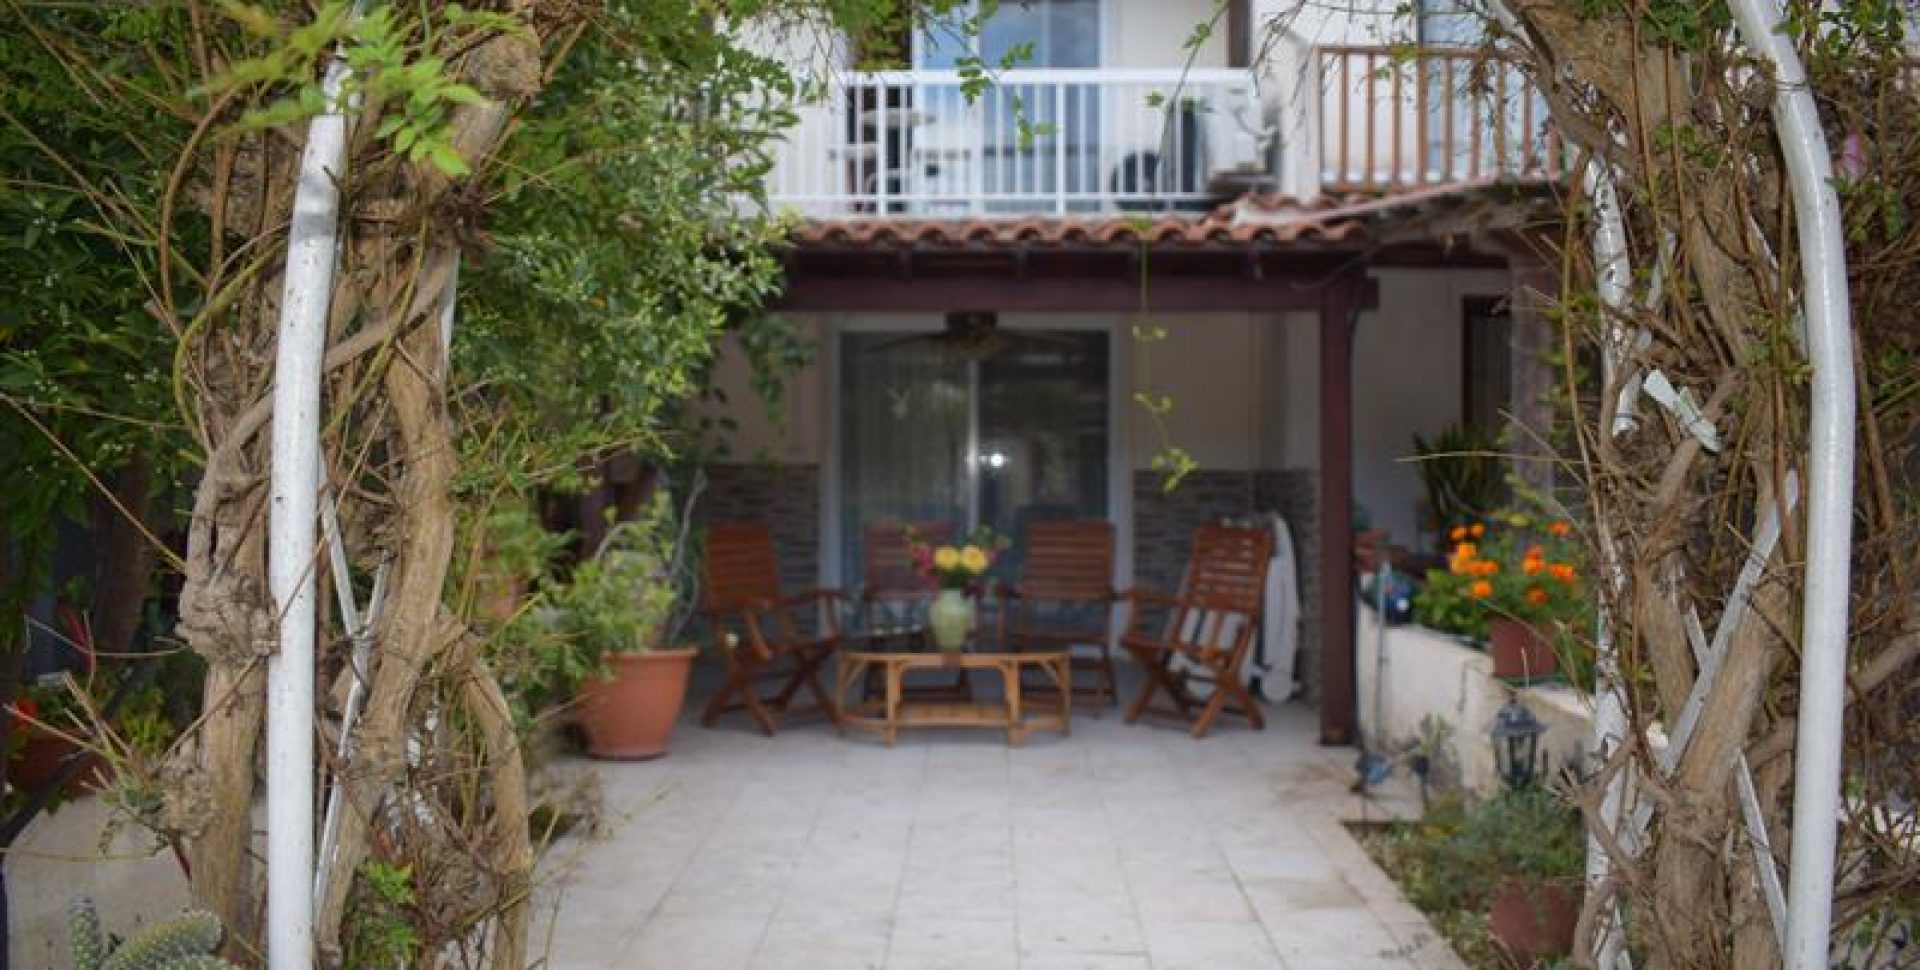 2 Bedroom Cyprus Family House